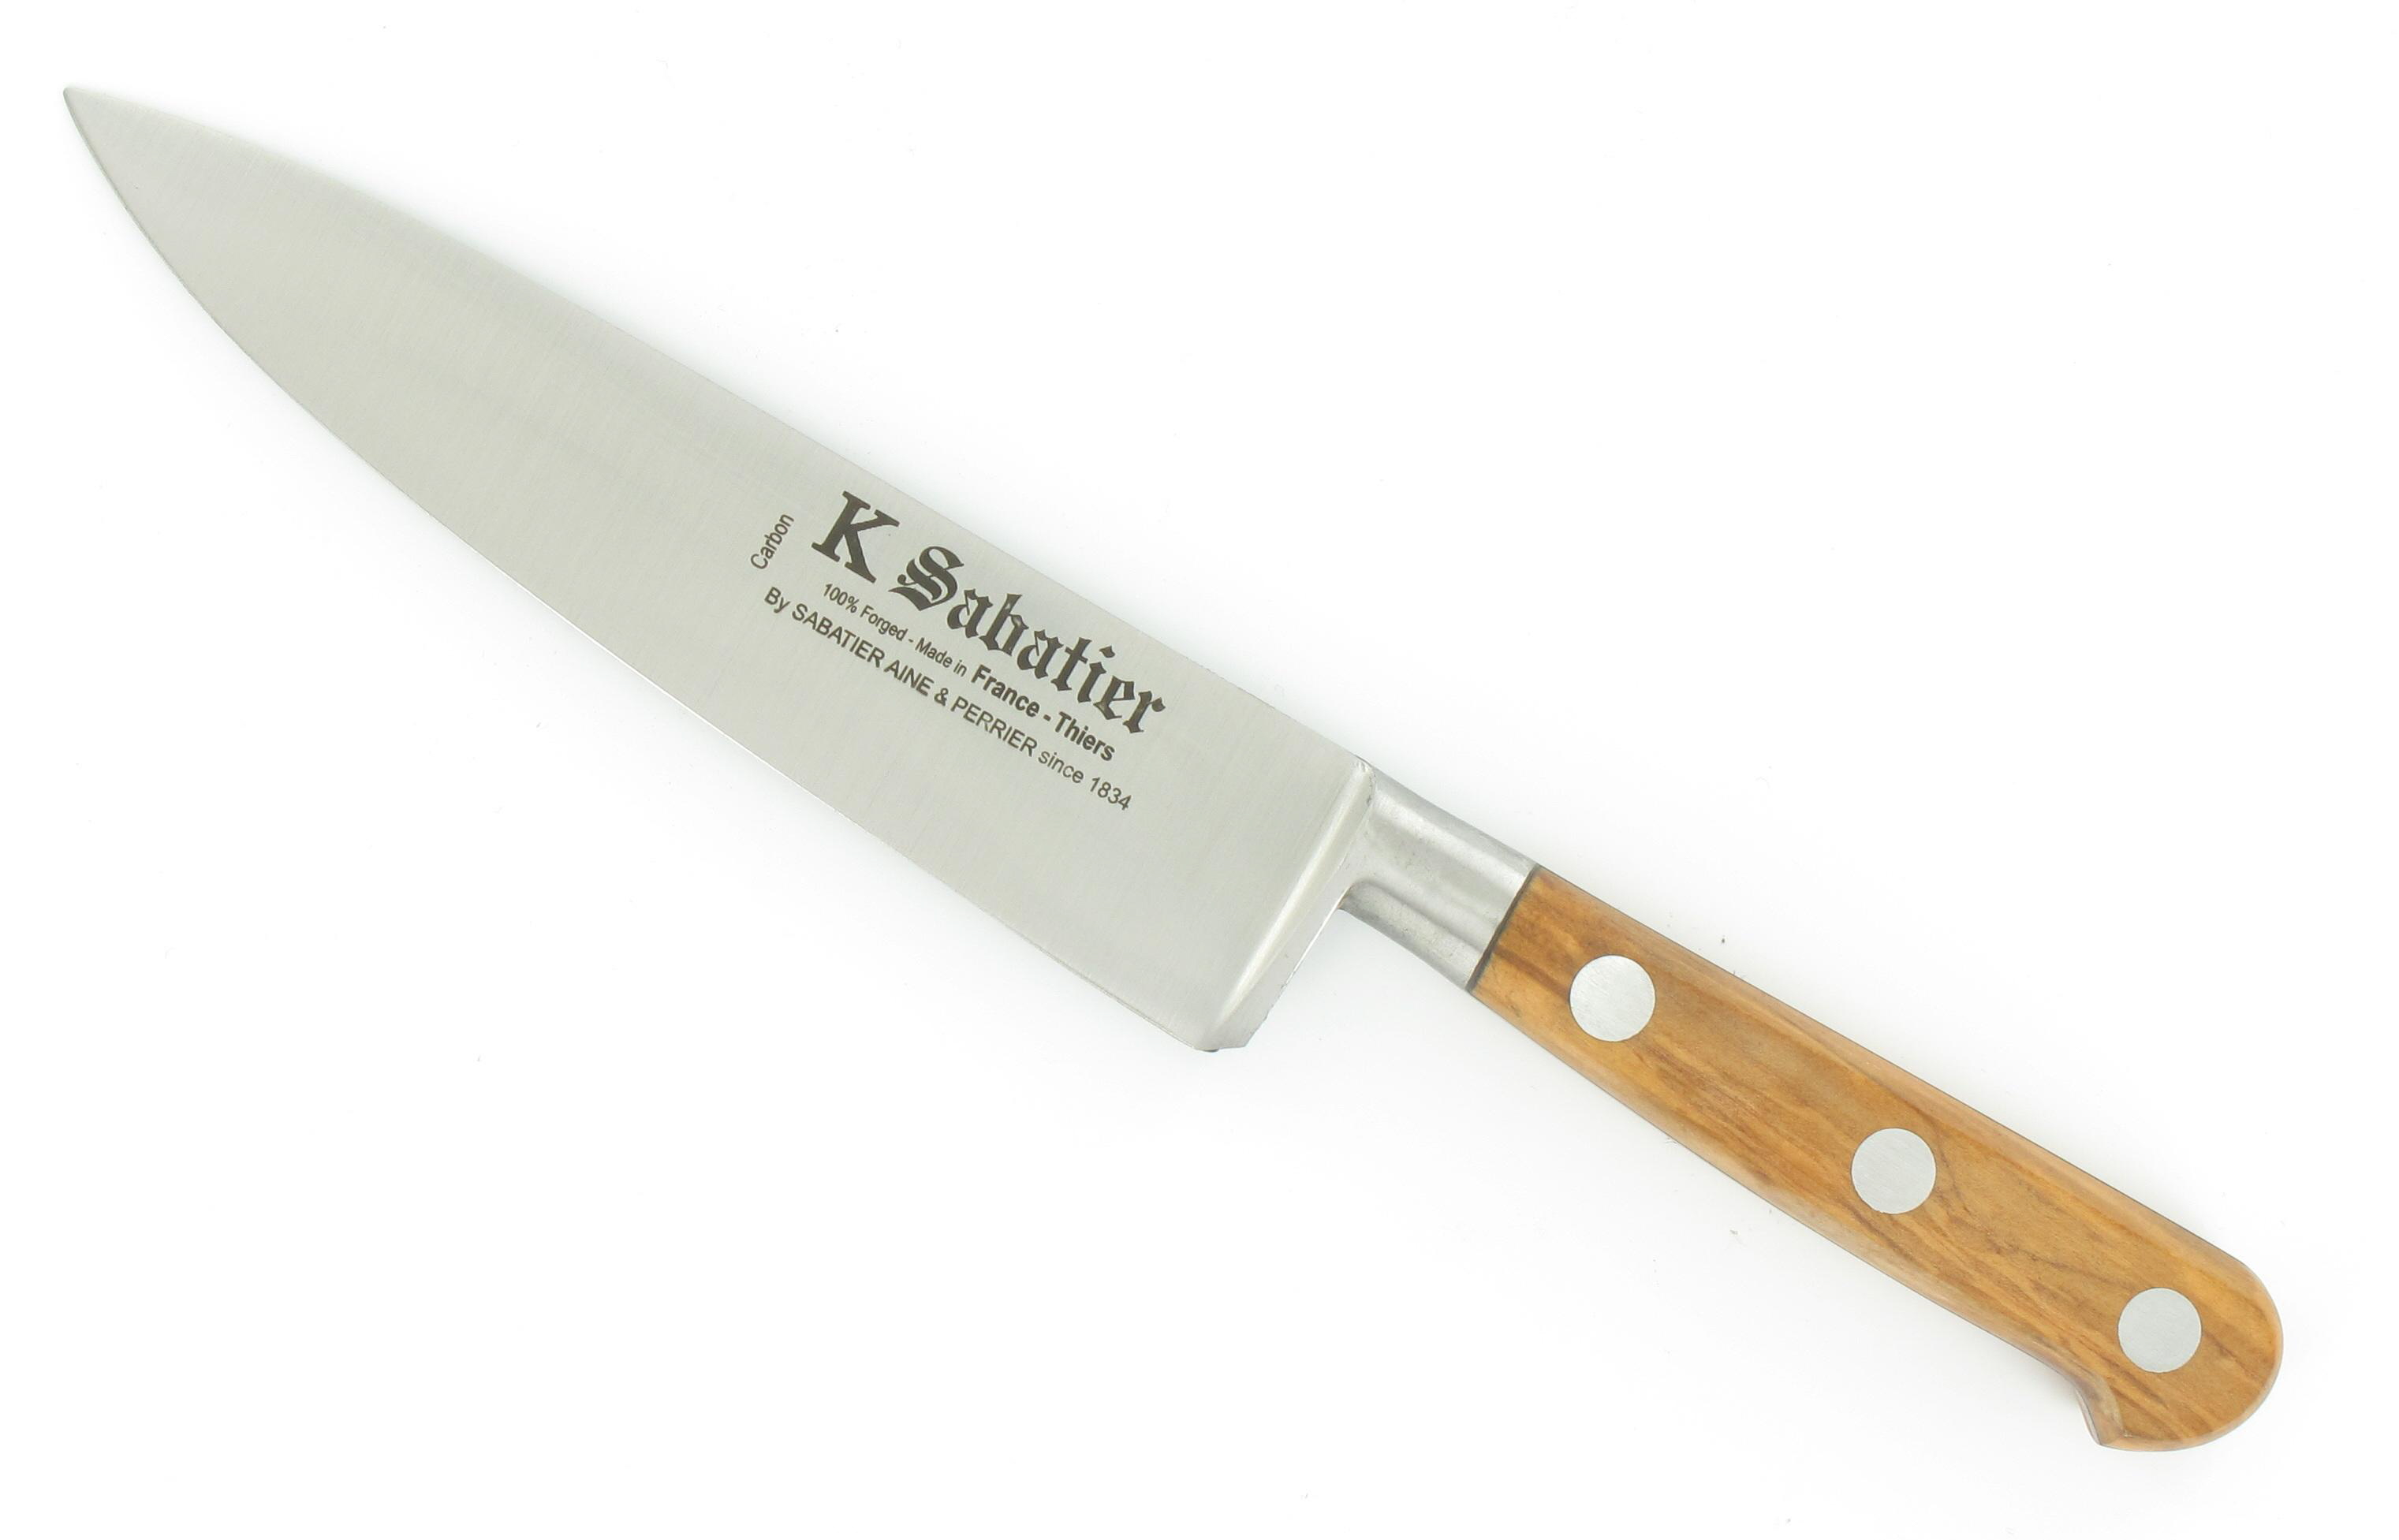 Sabatier 6 Chef's Knife Stainless Steel with Olivewood Handle